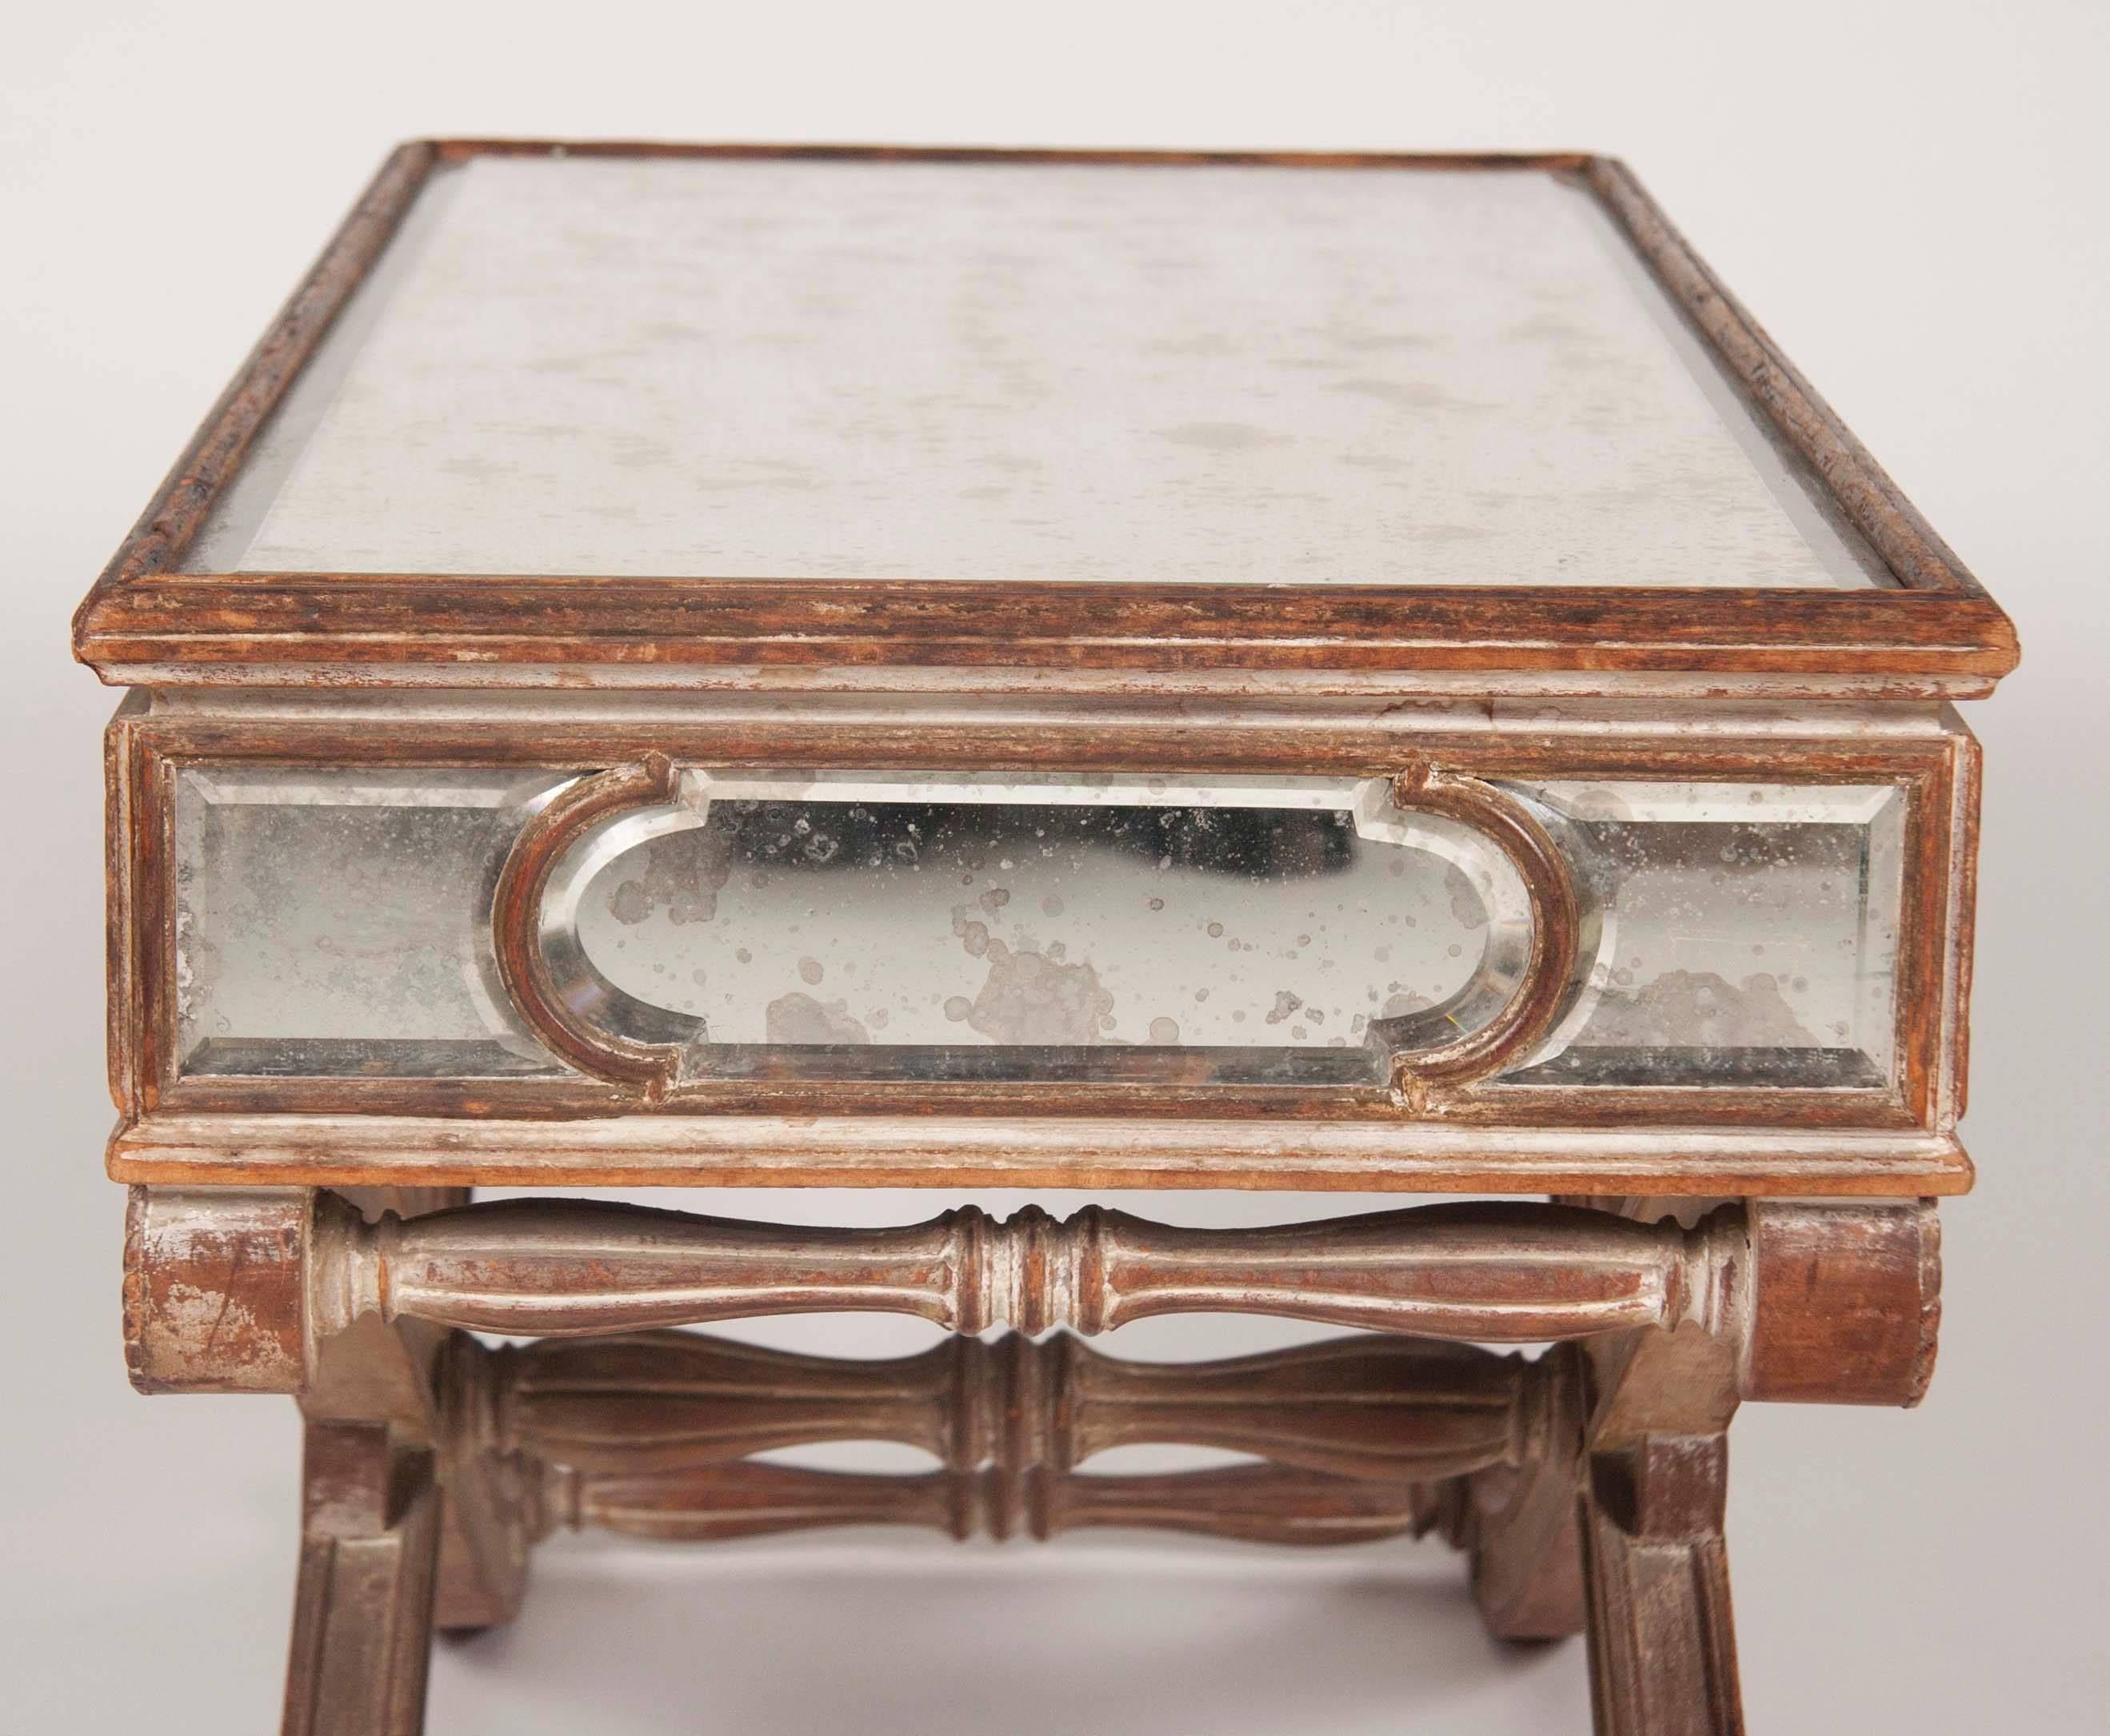 Italian Mid-20th Century Cerused Wood Mirrored Coffee Table with X-form Base For Sale 5